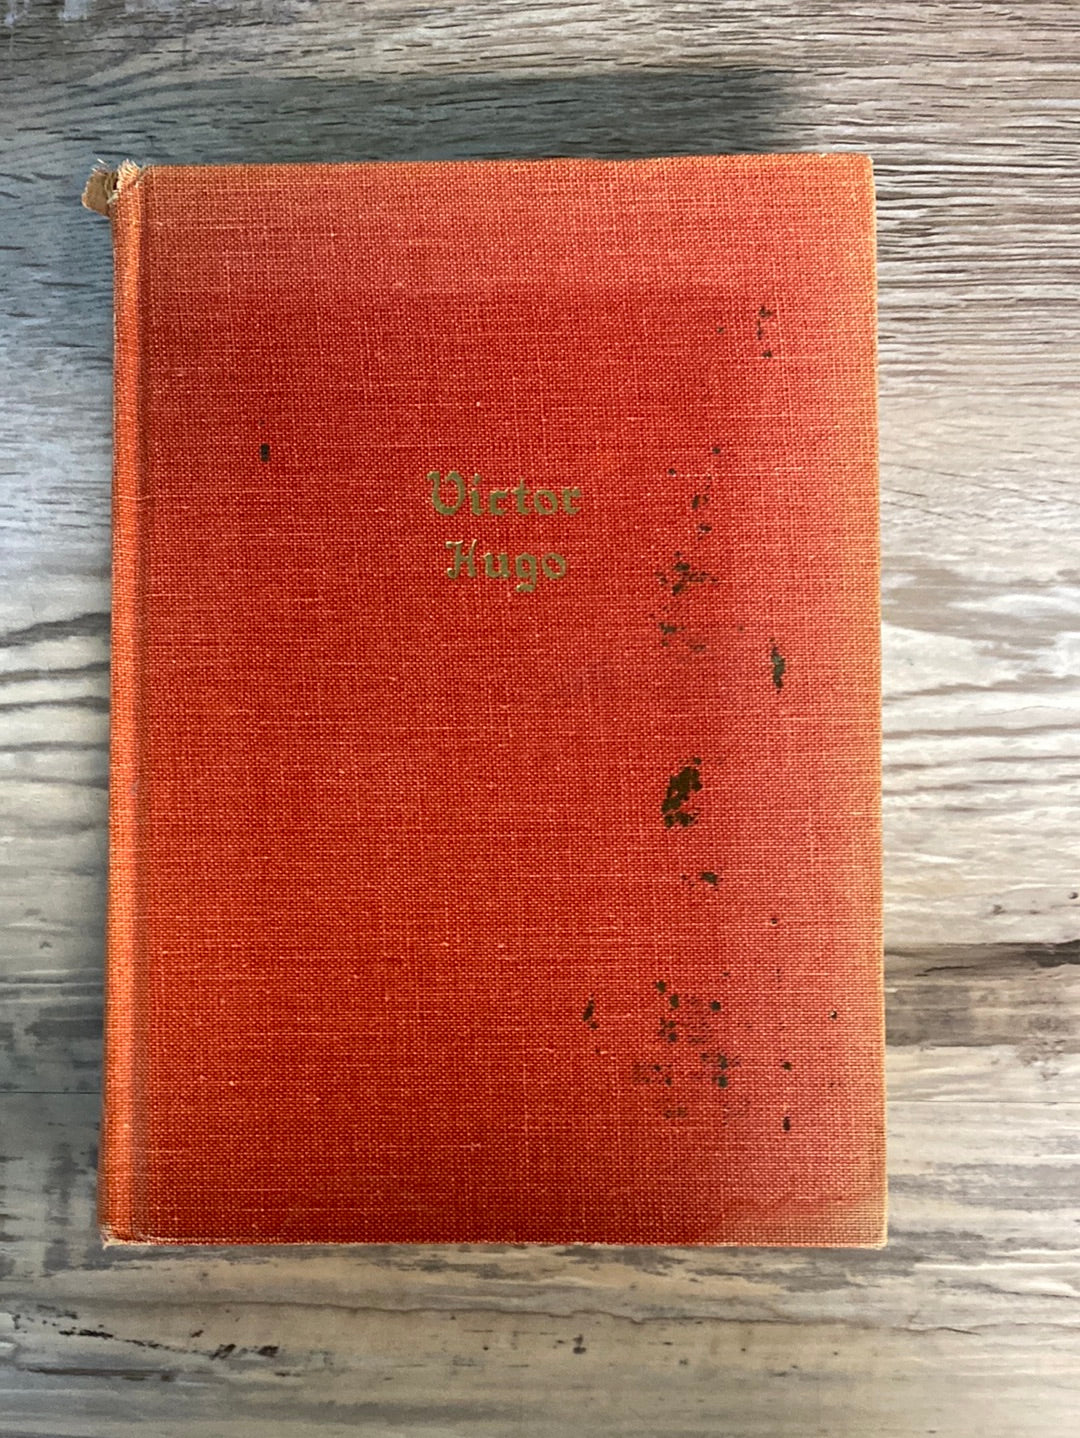 The Works of Victor Hugo, One Volume Edition